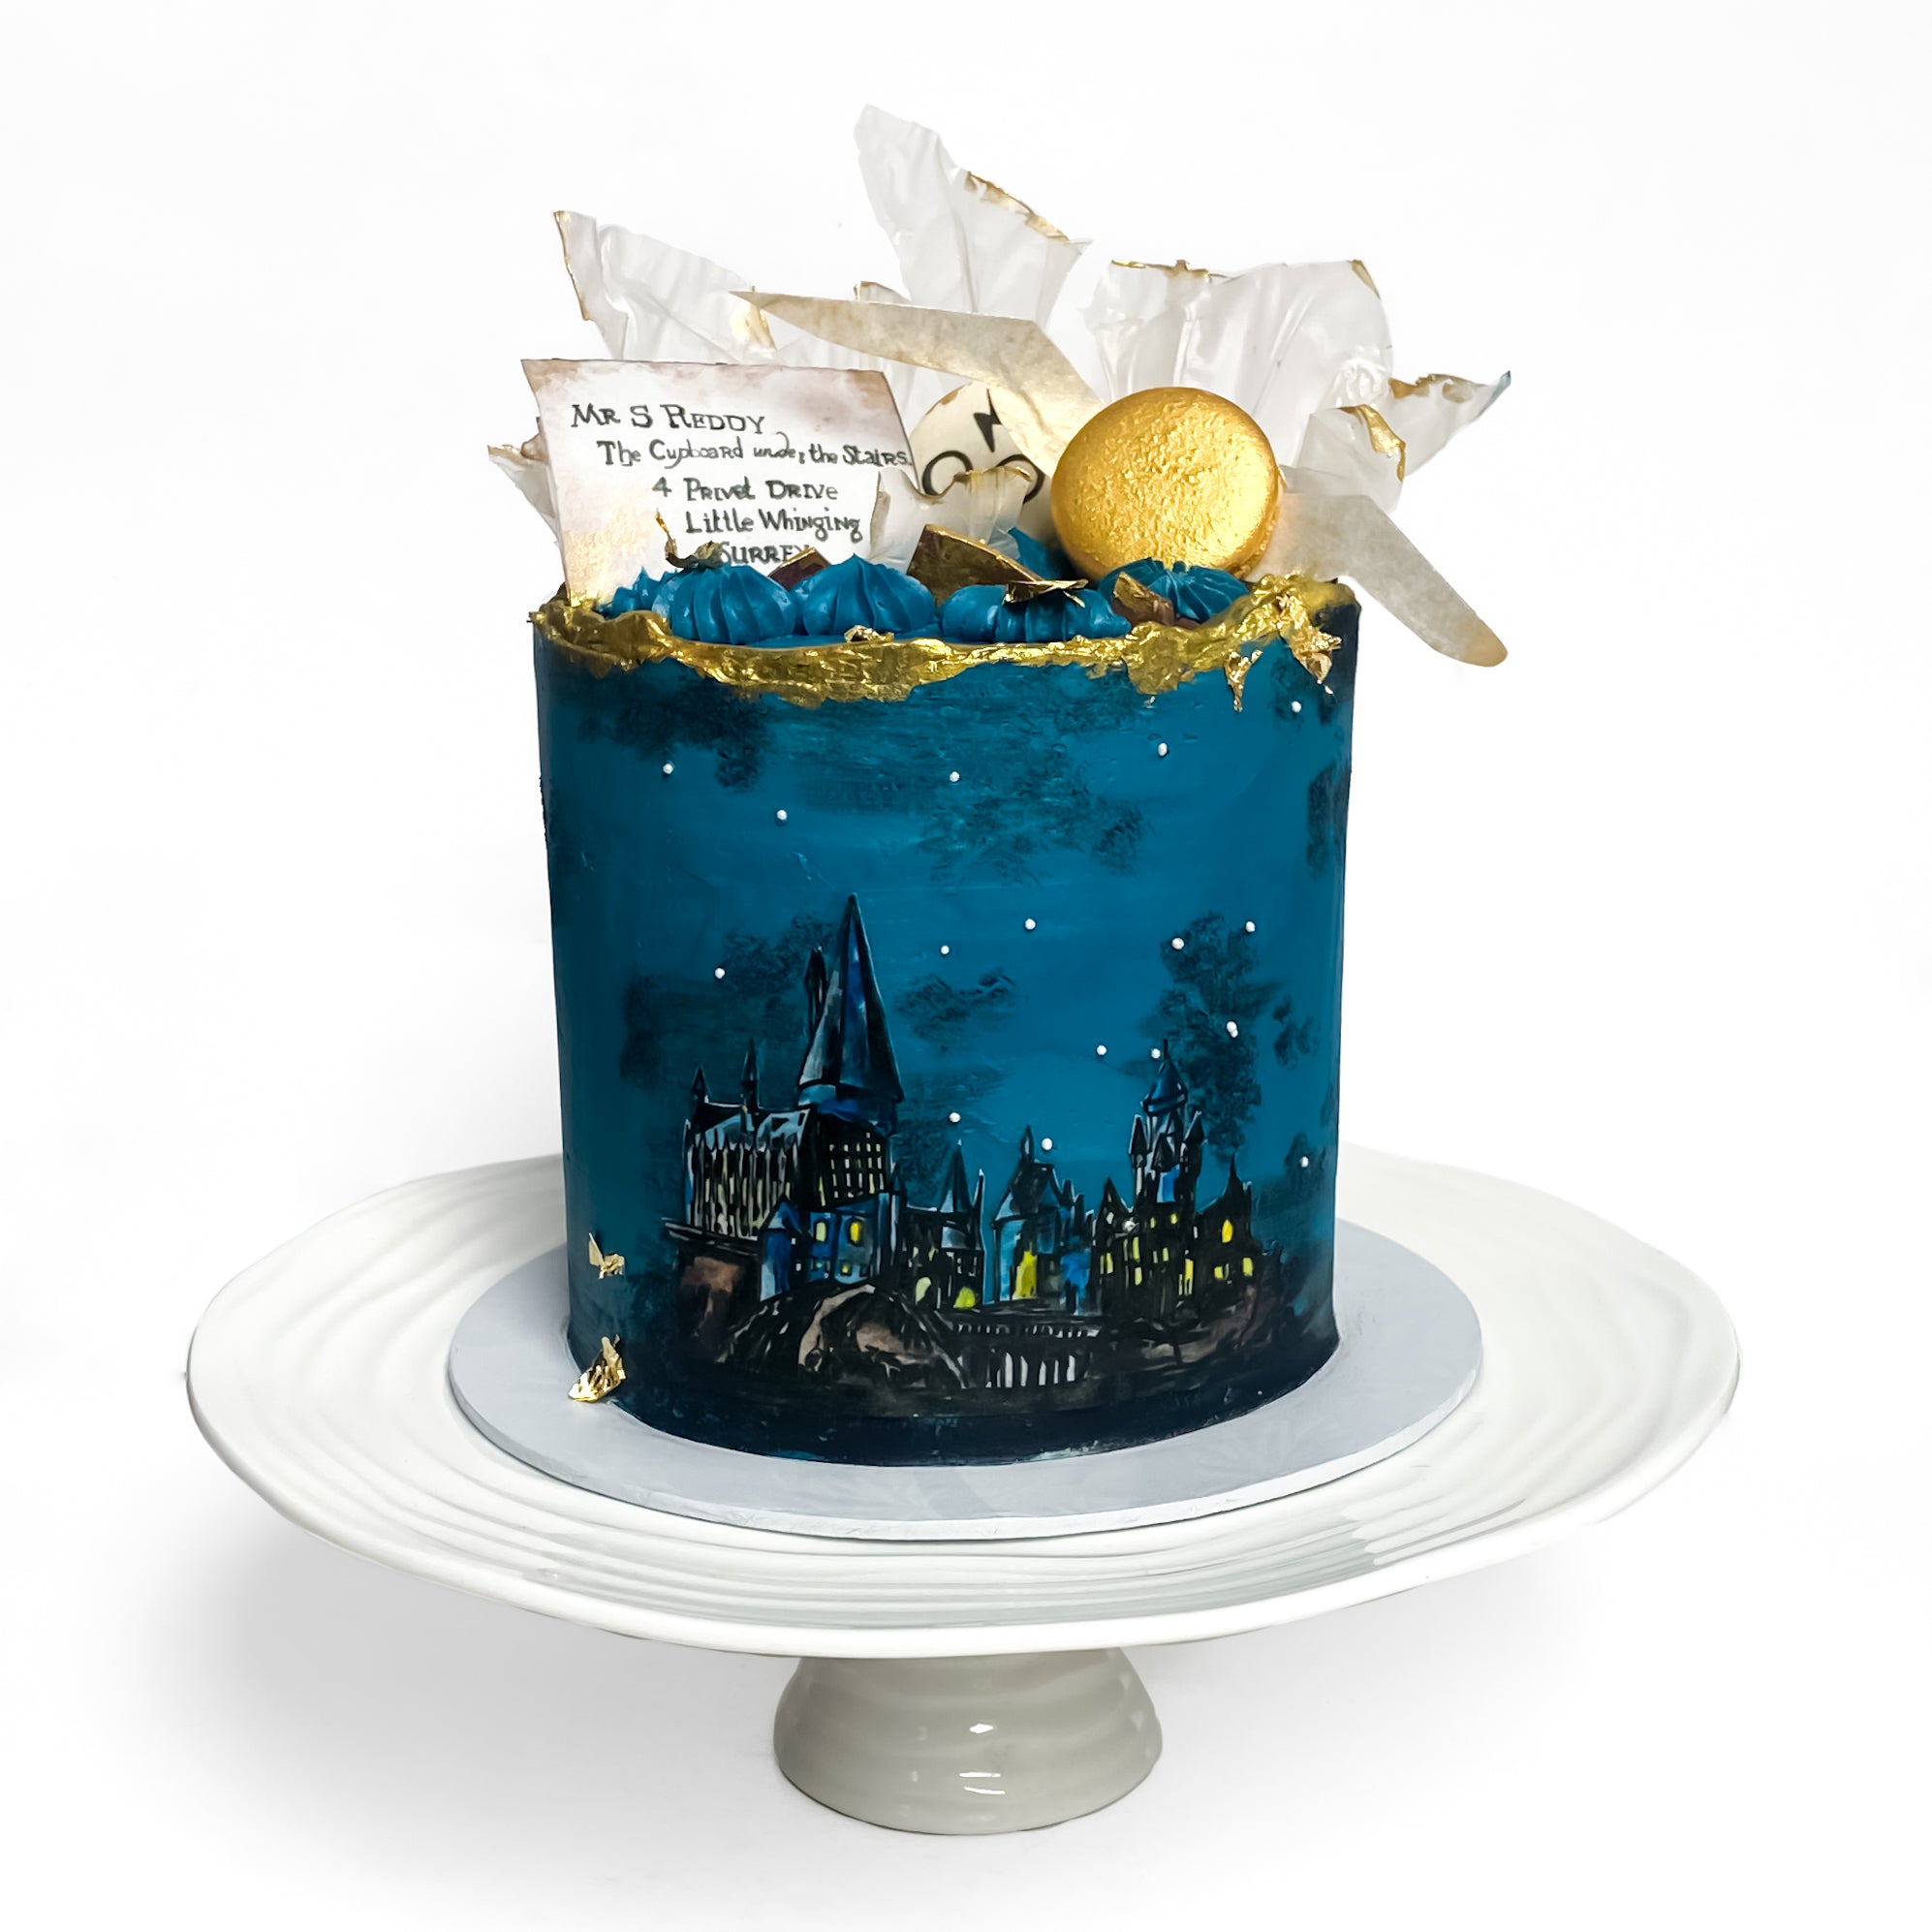 Hagrid's 11th Birthday Cake for Harry [Harry Potter and the Sorcerer's  Stone (book)] — TV DINNER